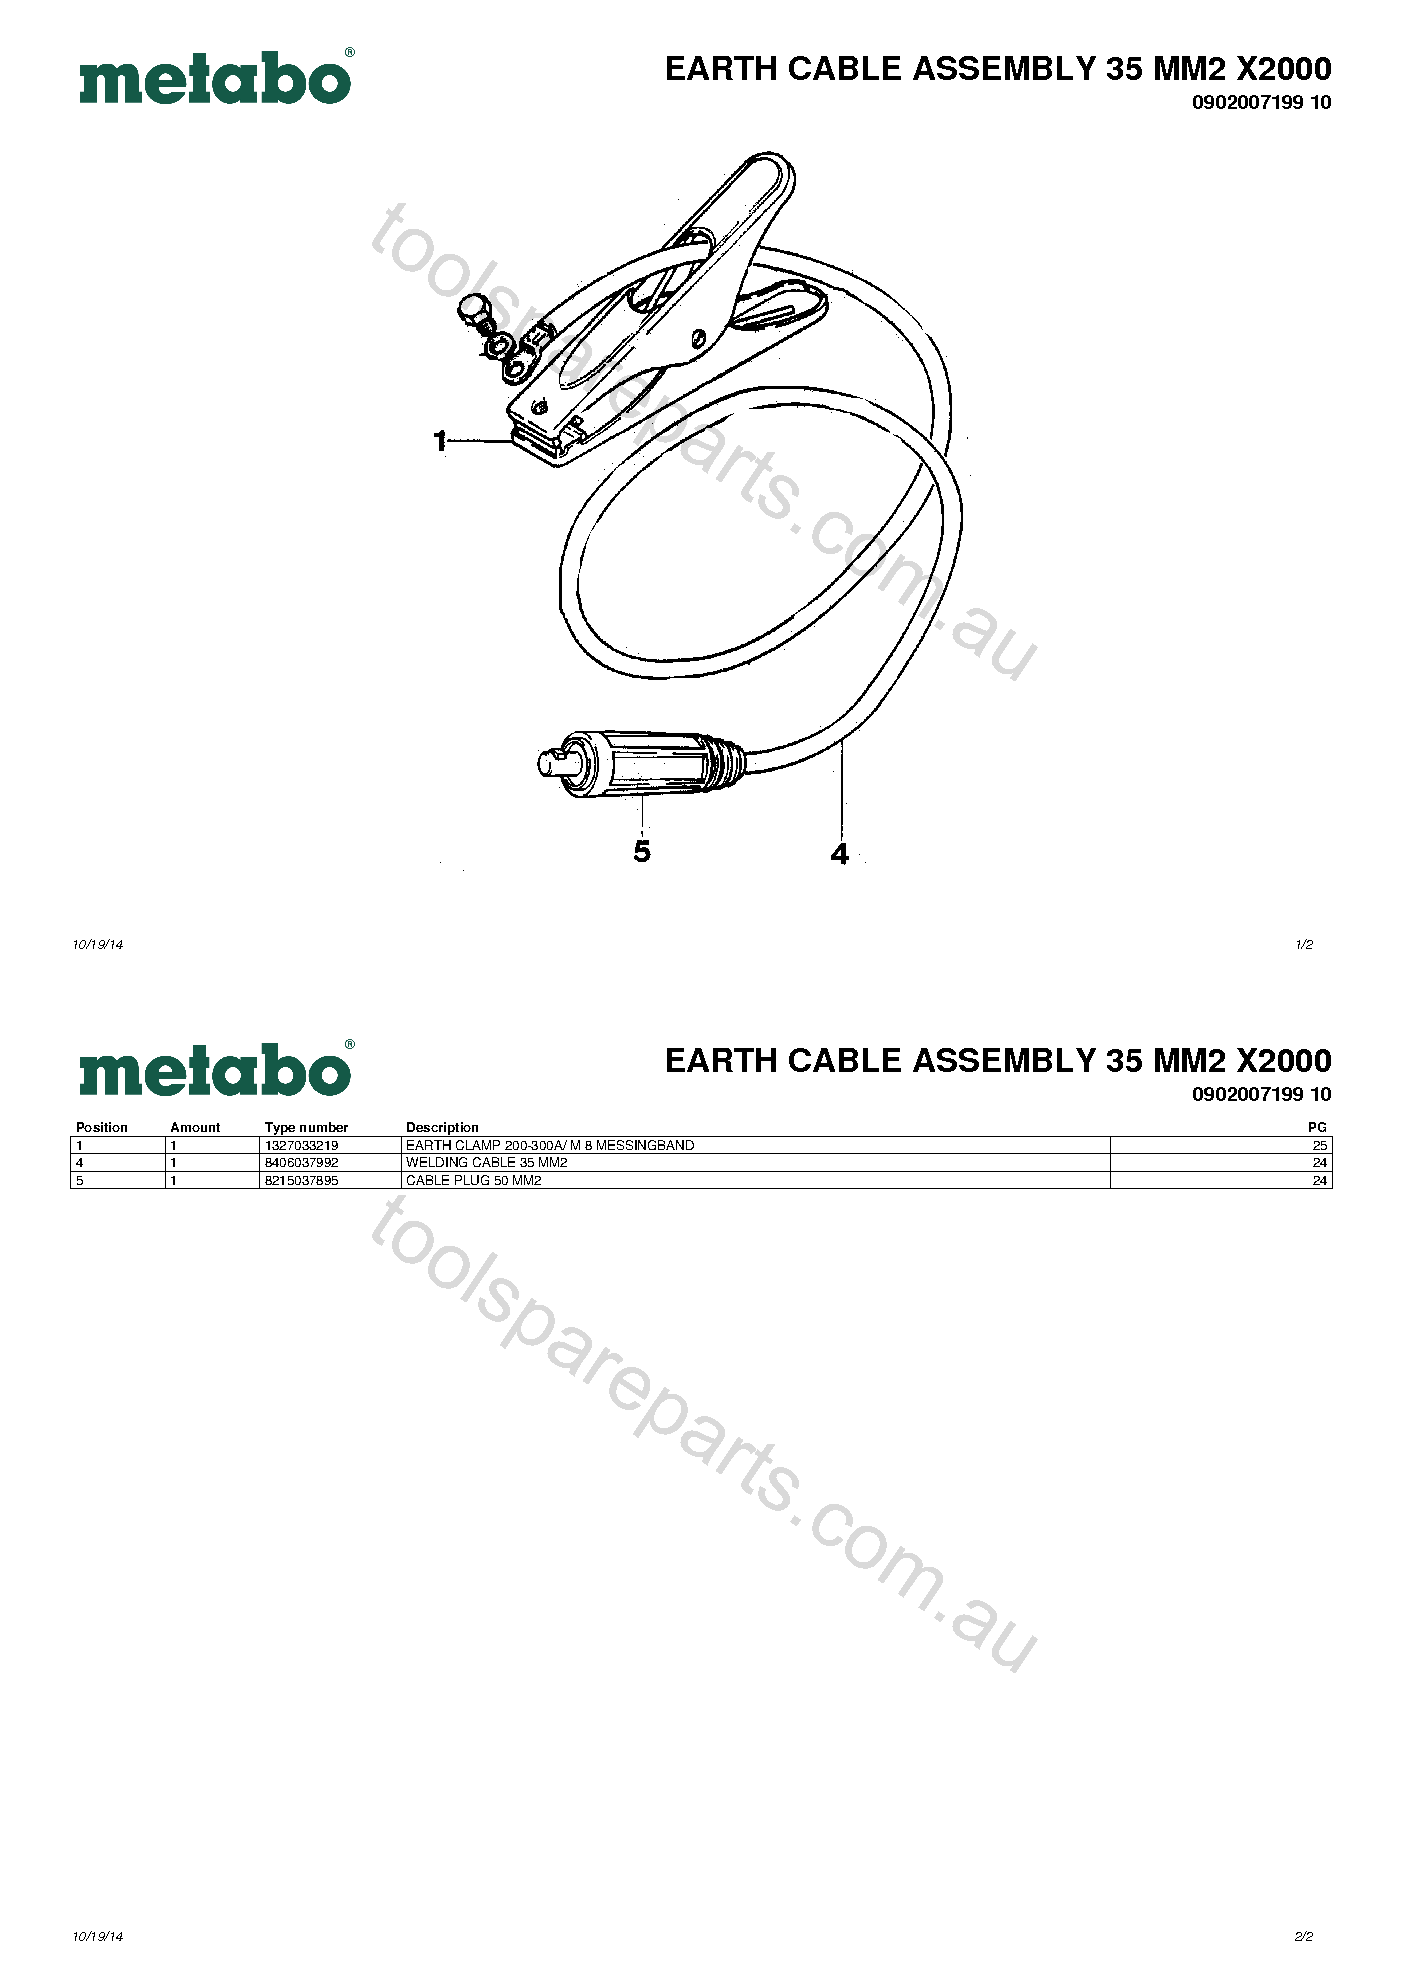 Metabo EARTH CABLE ASSEMBLY 35 MM2 X2000 0902007199 10  Diagram 1